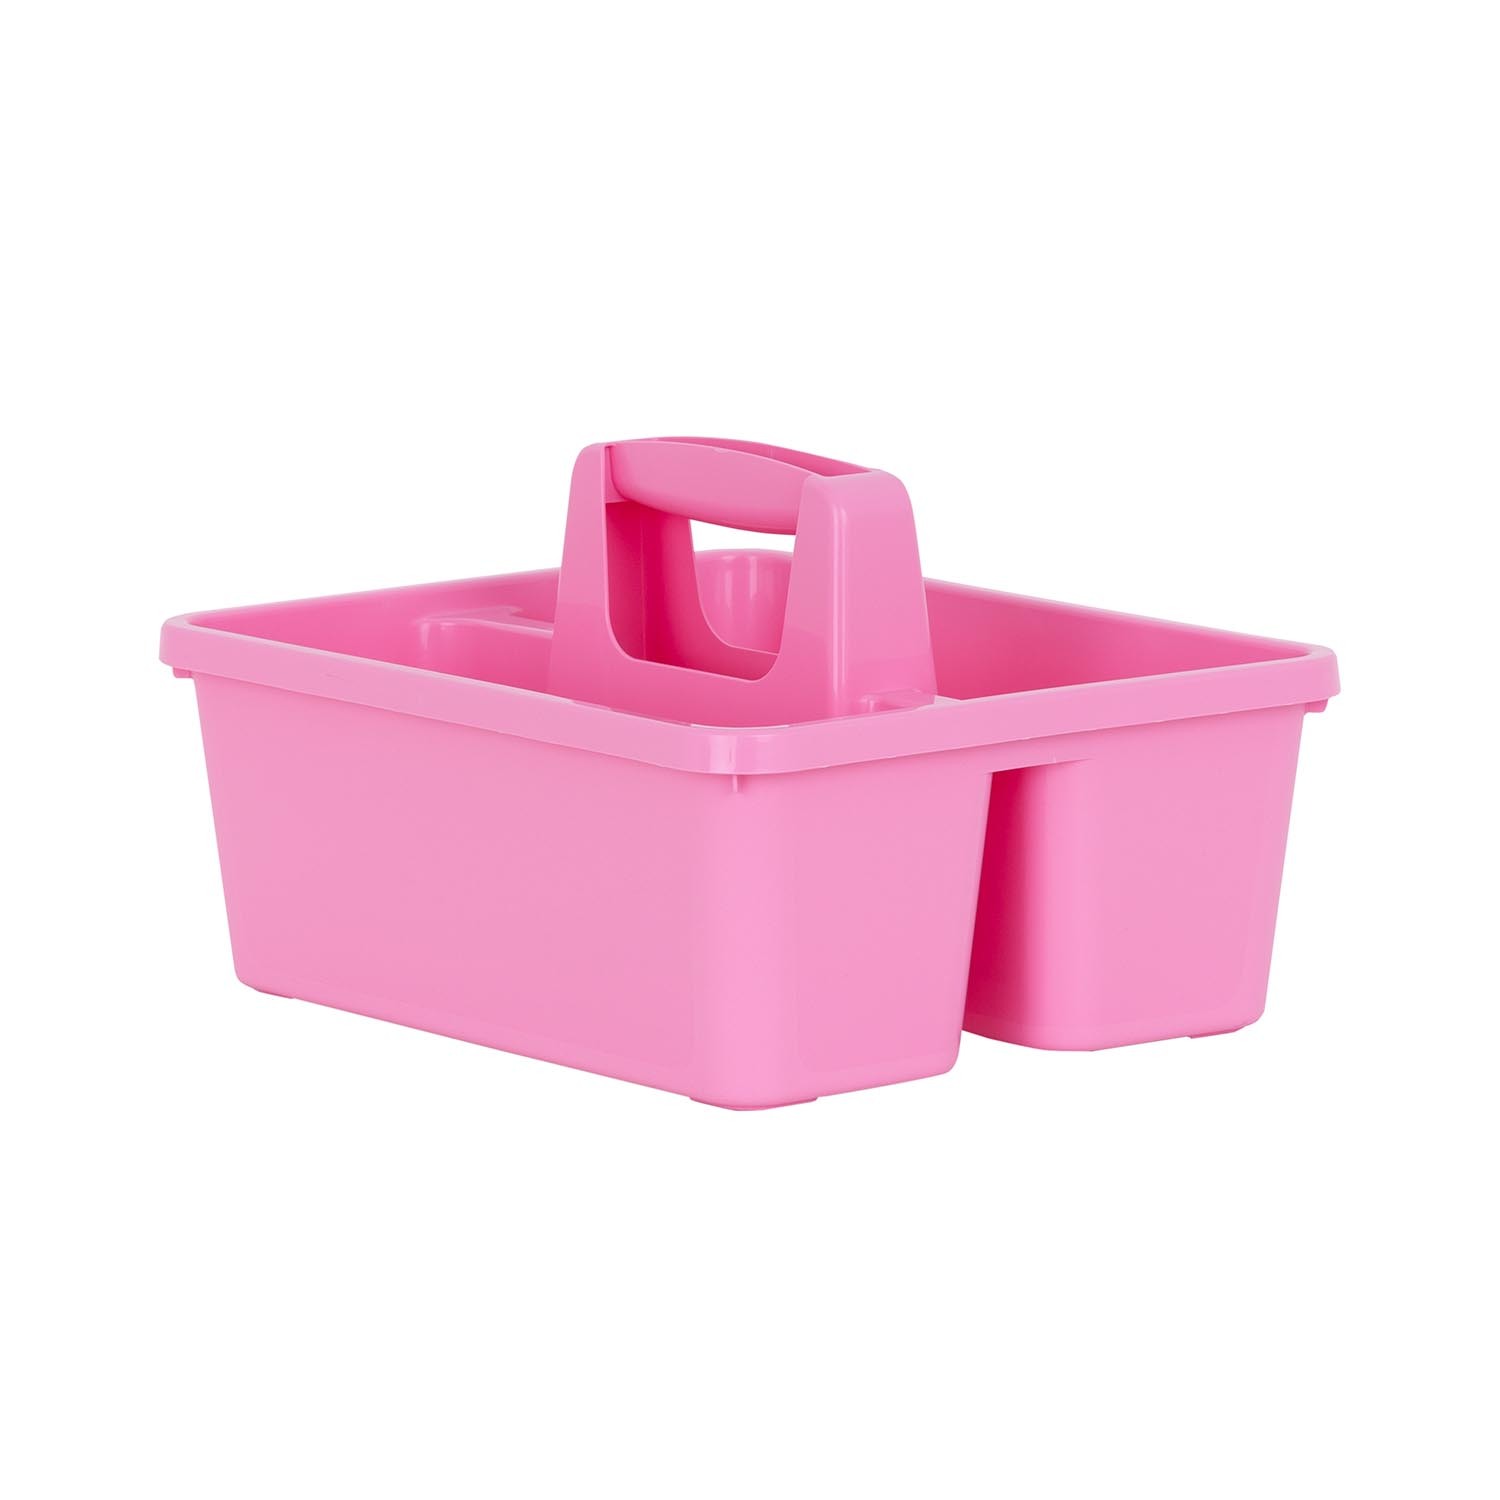 Wham 2 Compartment Kitchen Caddy - Pink Image